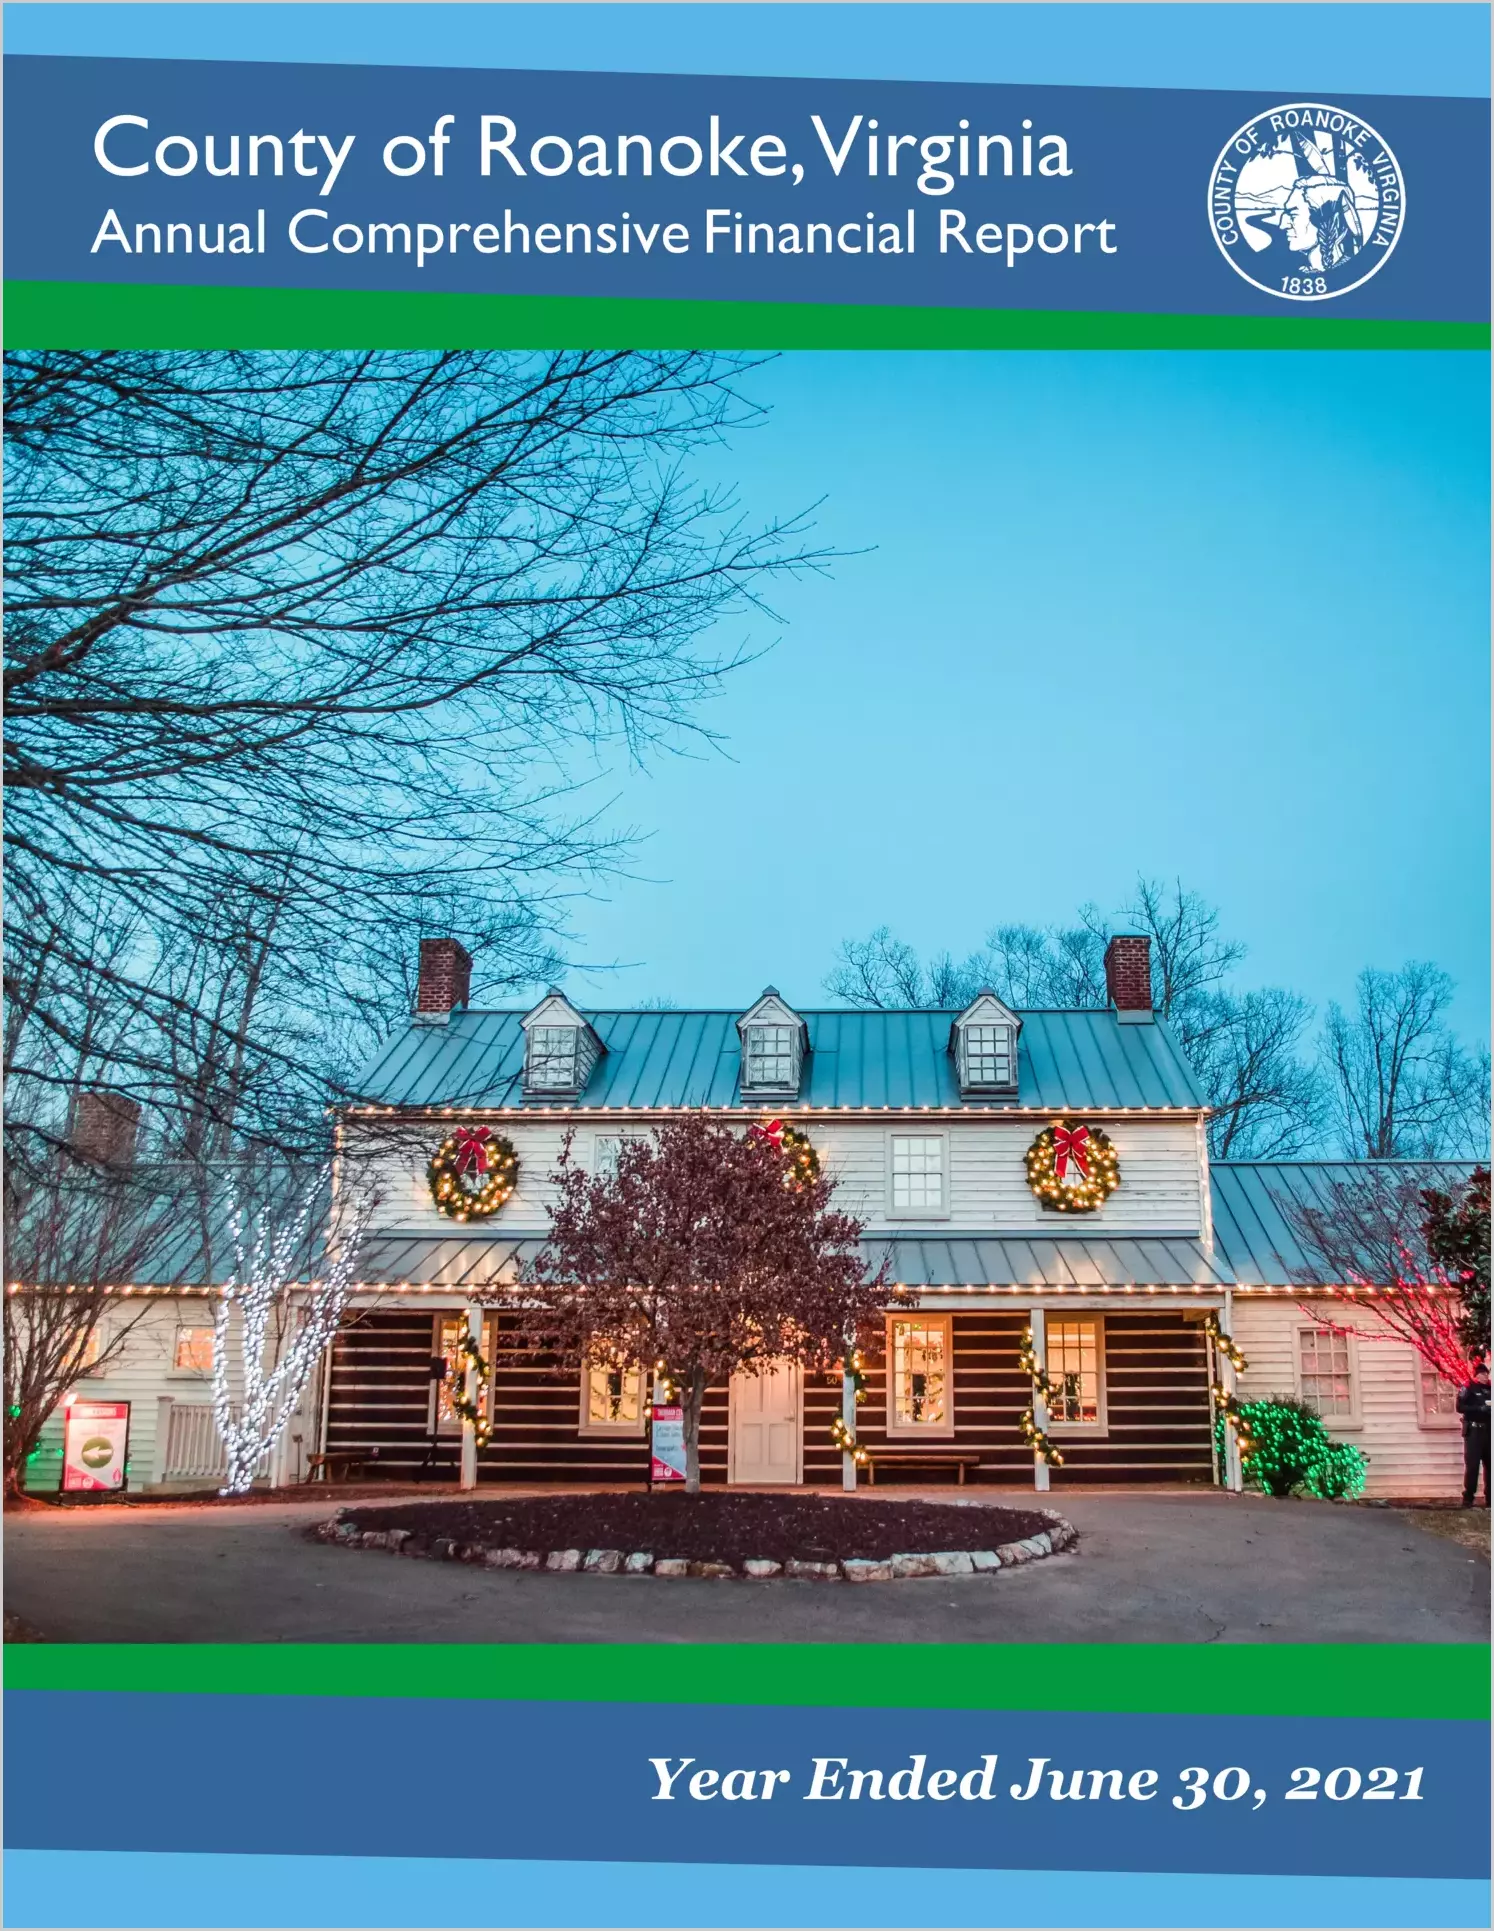 2021 Annual Financial Report for County of Roanoke